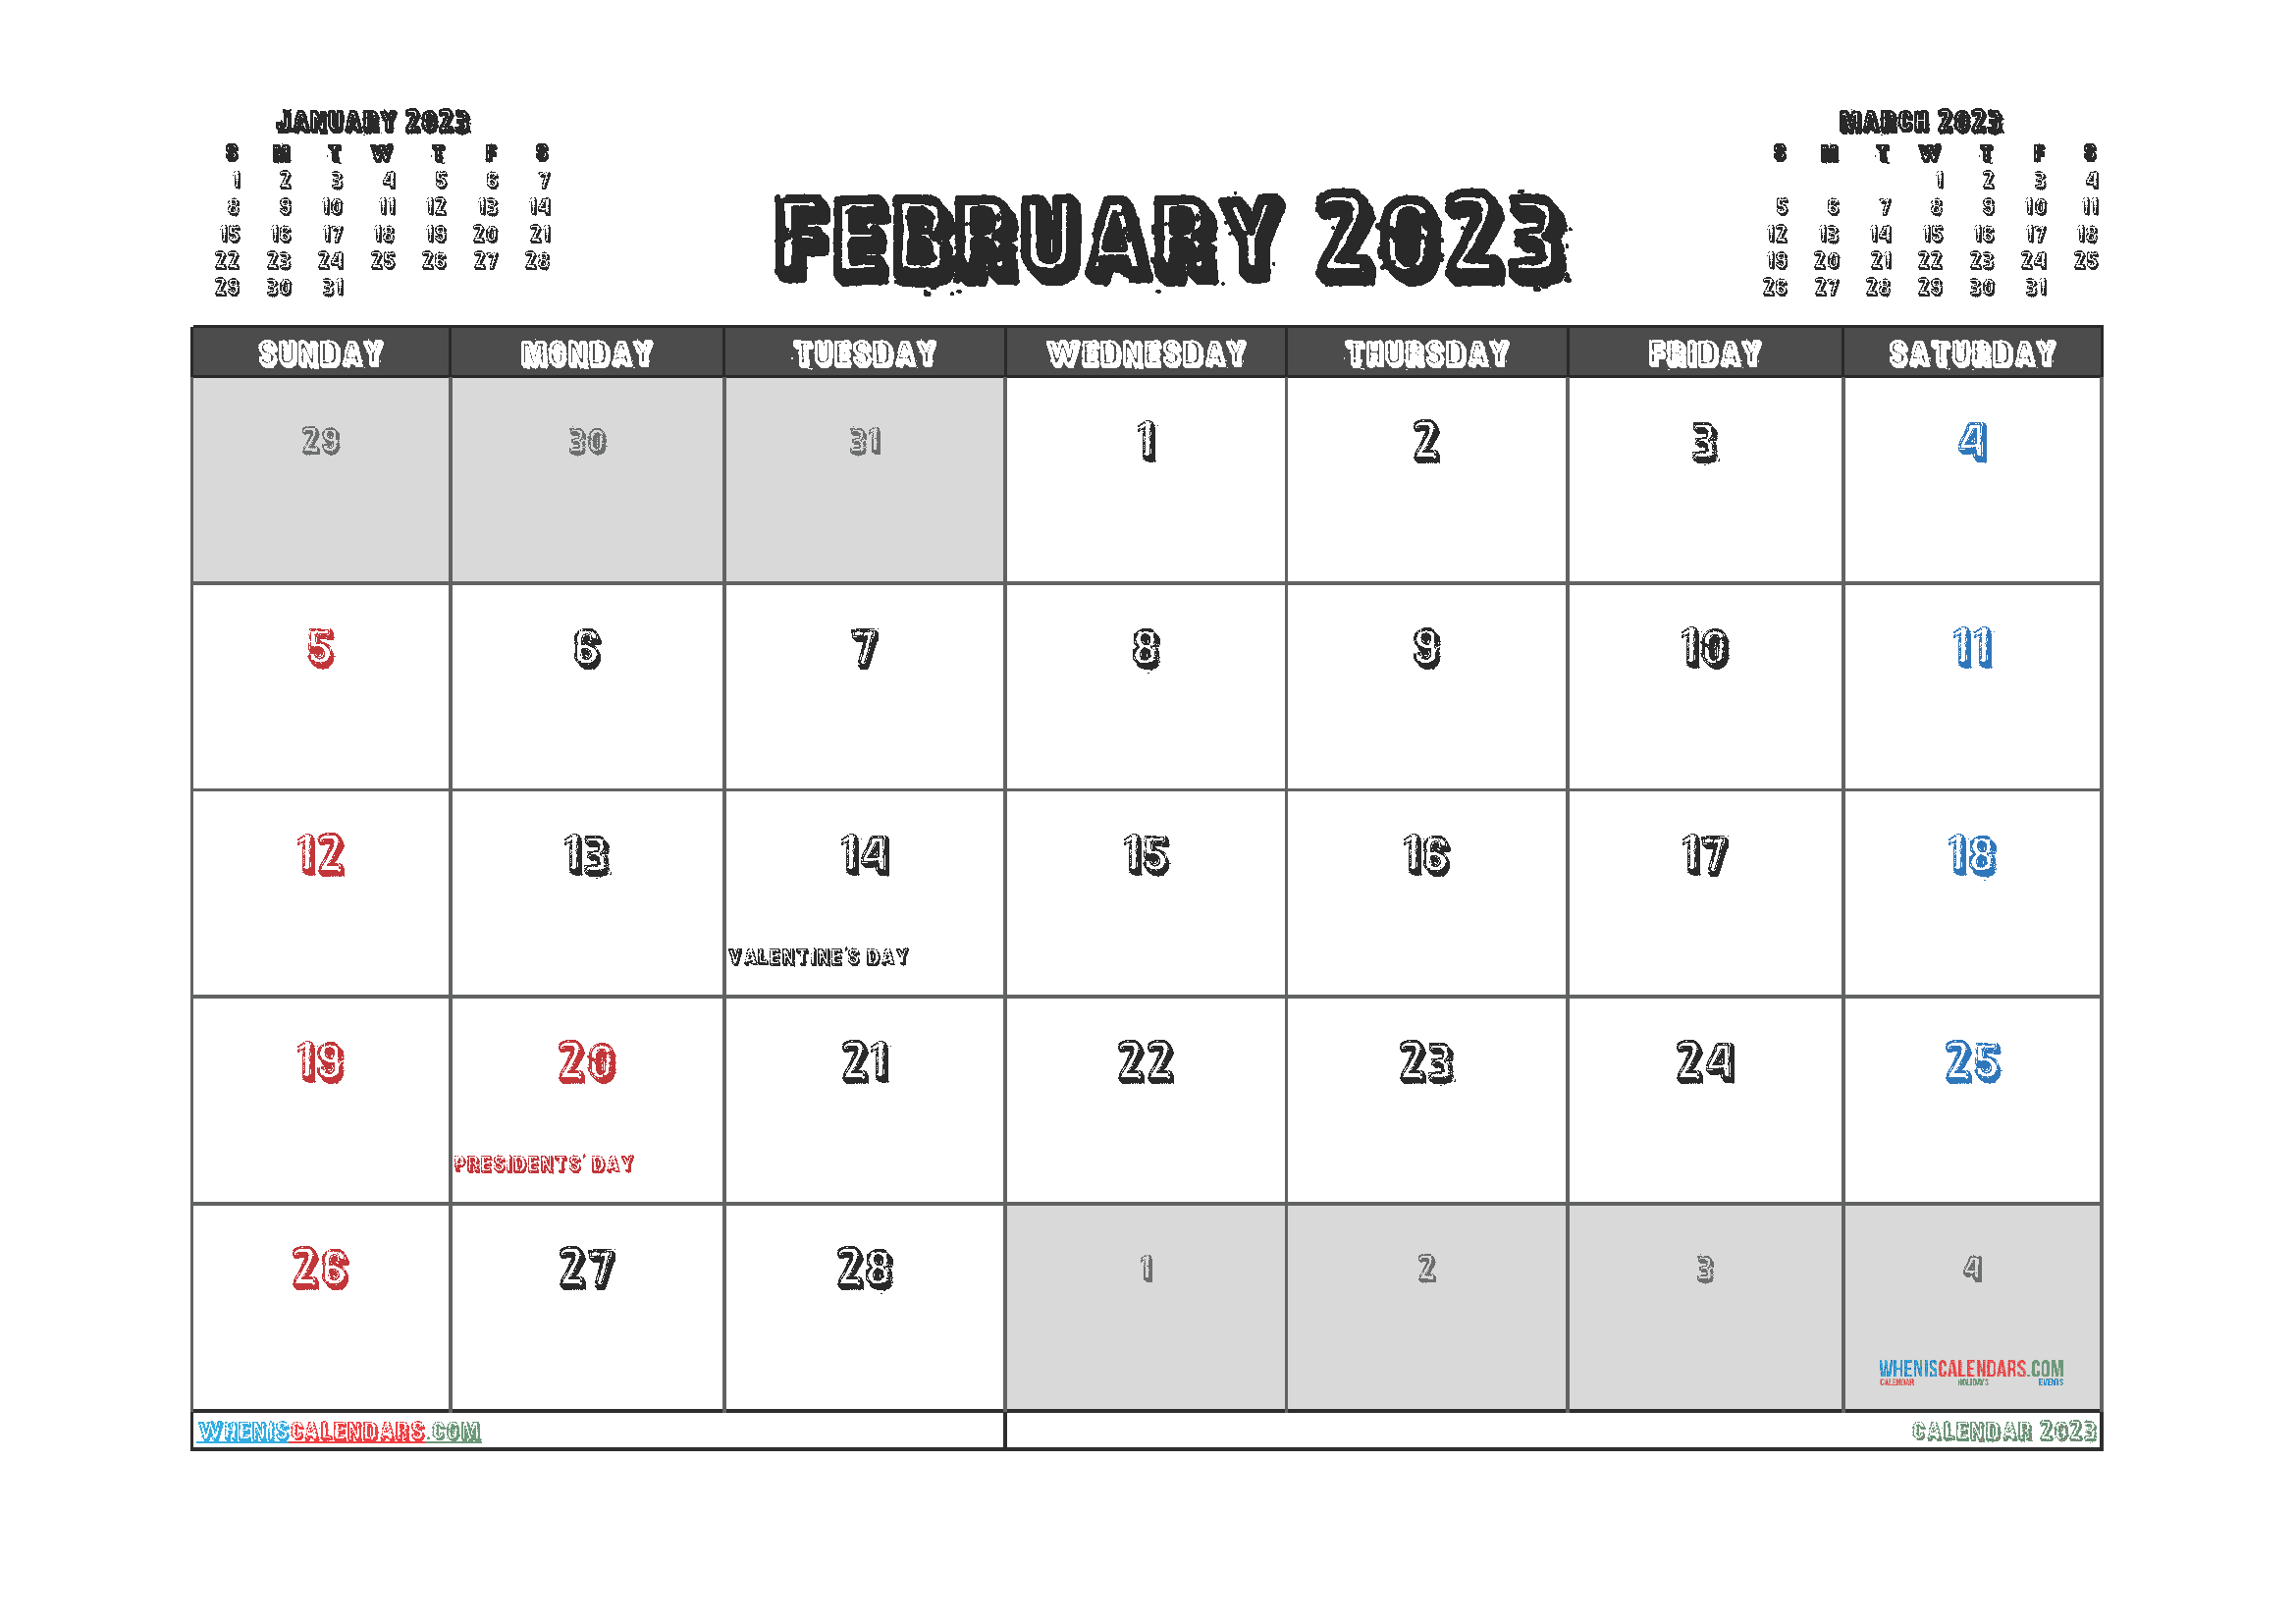 Free Printable Calendar February 2023 with Holidays PDF in Landscape